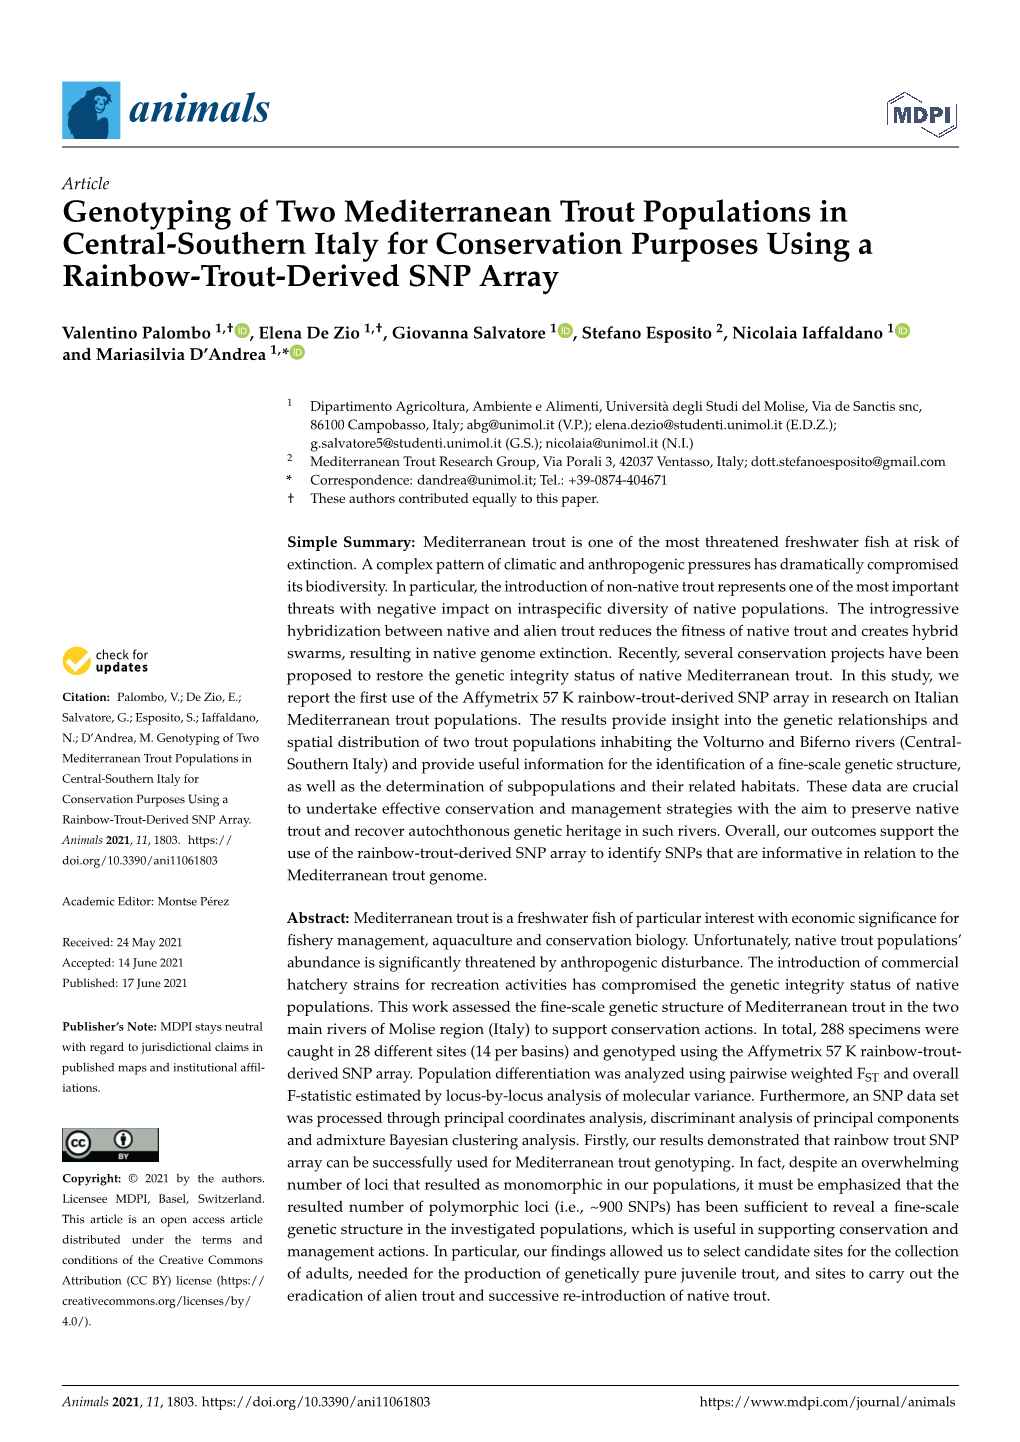 Genotyping of Two Mediterranean Trout Populations in Central-Southern Italy for Conservation Purposes Using a Rainbow-Trout-Derived SNP Array